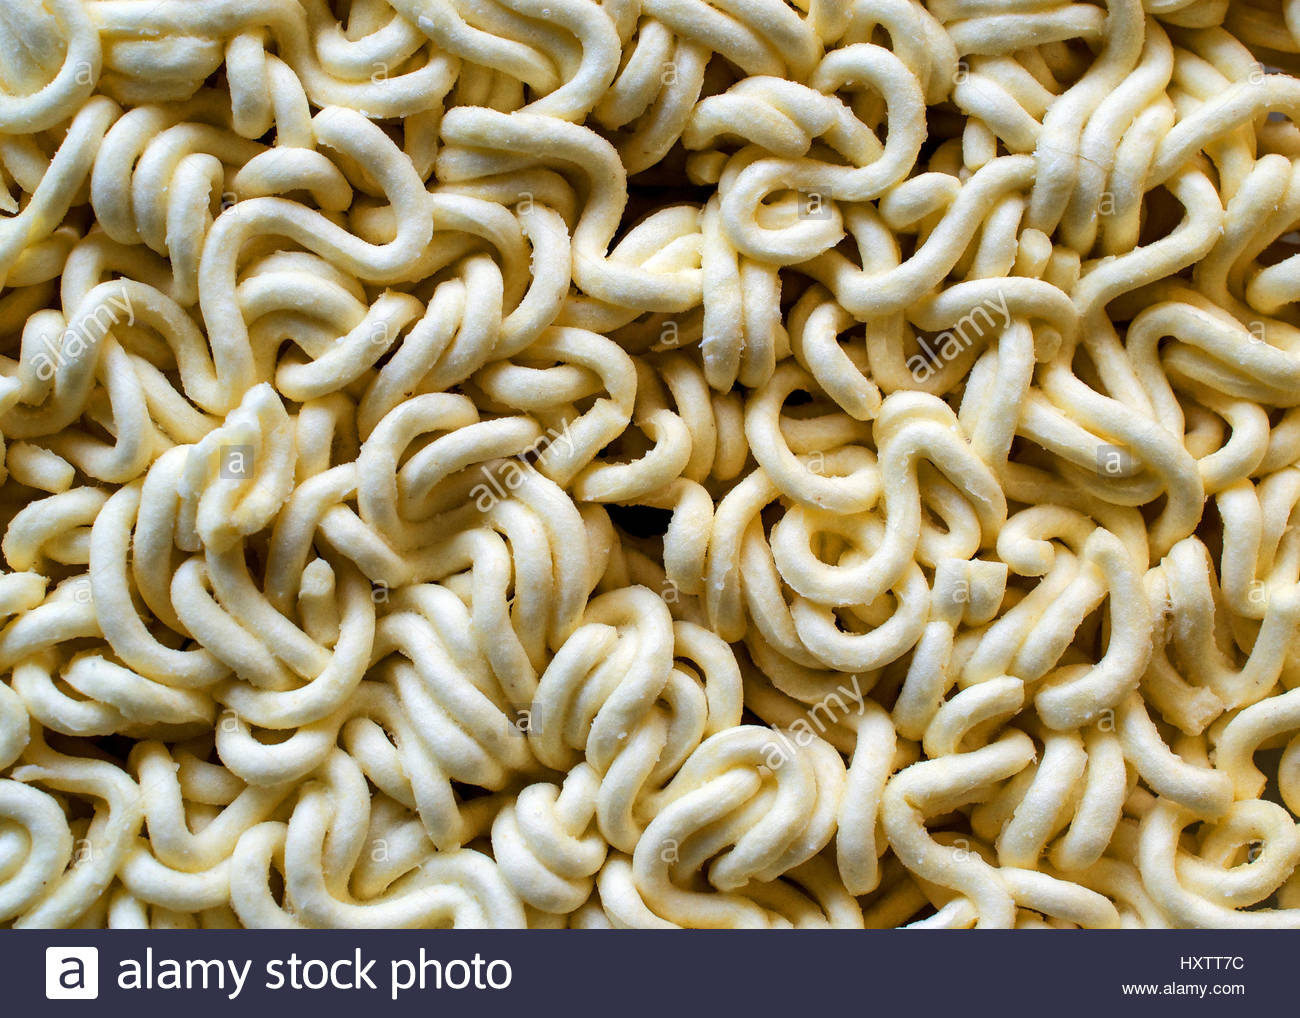 Raw And Dry Instant Ramen Noodles Food Texture Or Background